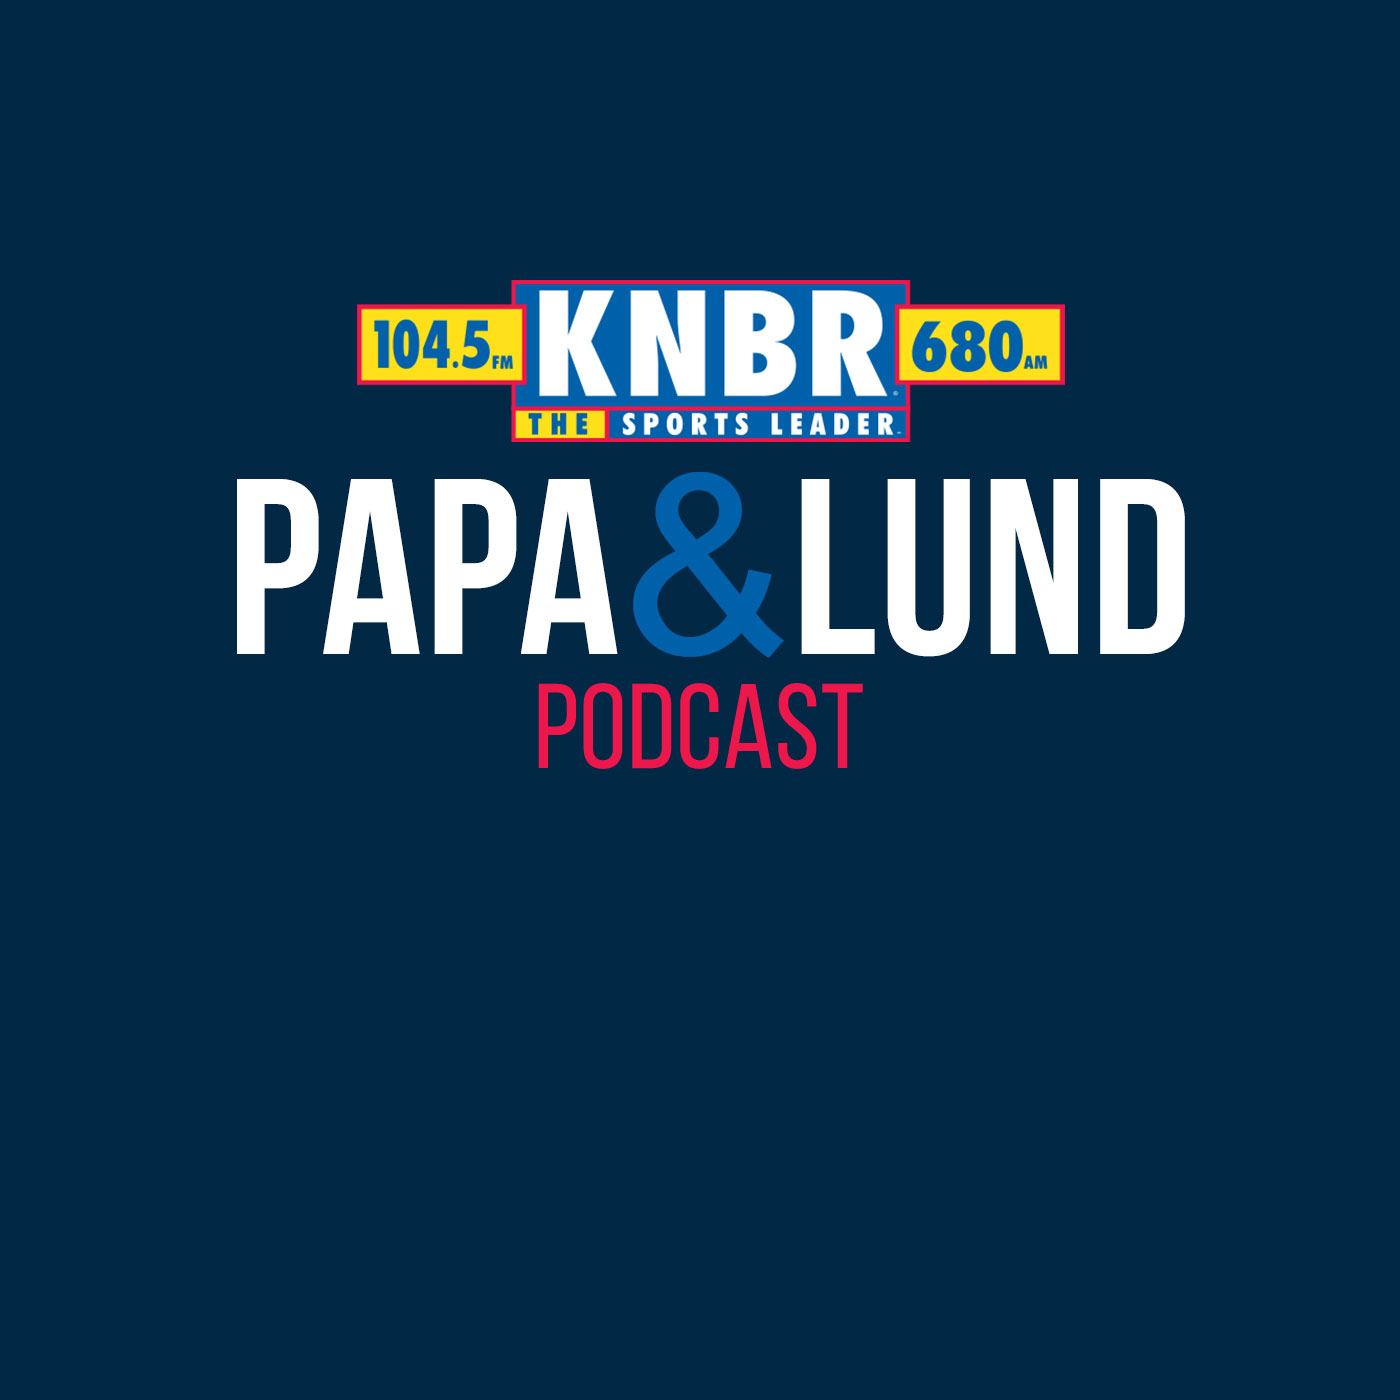 2-7 Mike Pritchard joins Papa & Lund LIVE from Media Row in Arizona to preview the Superbowl matchup between the Eagles and the Chiefs